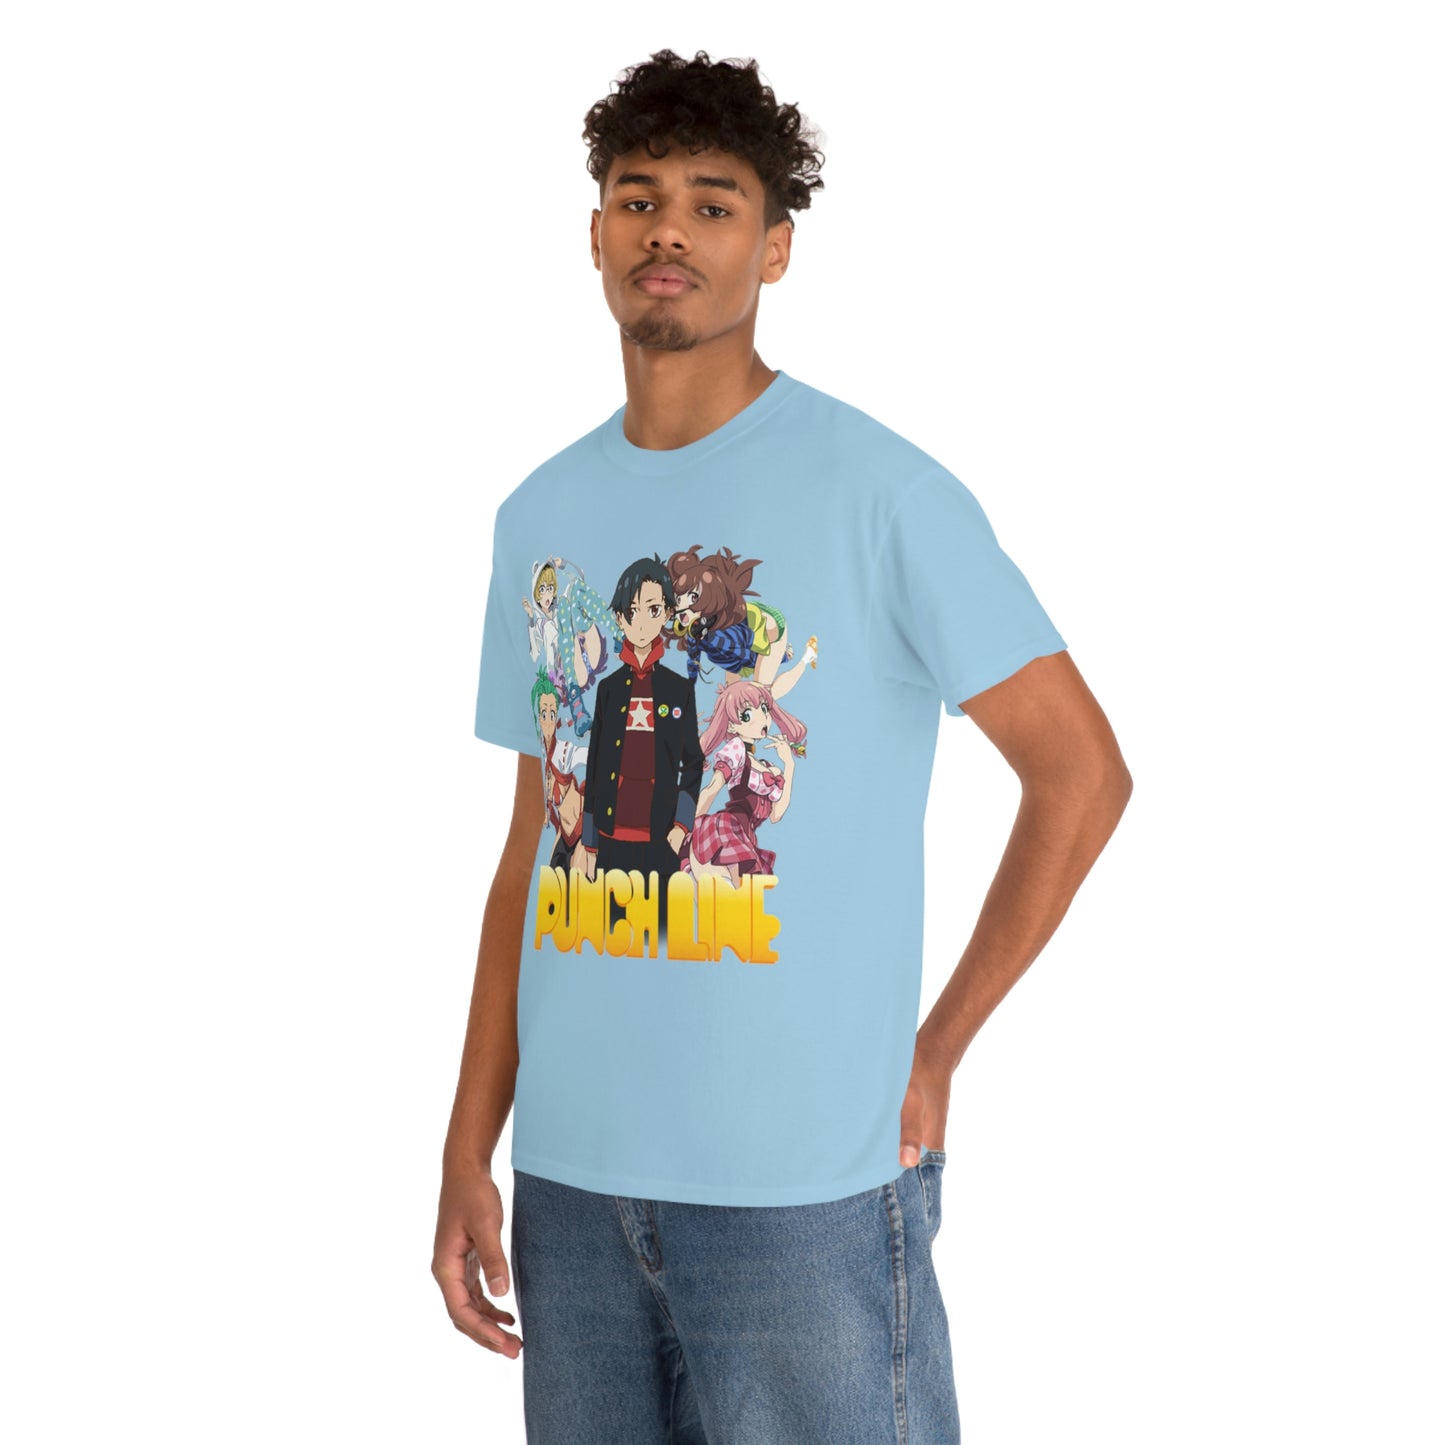 Punch Line Tee